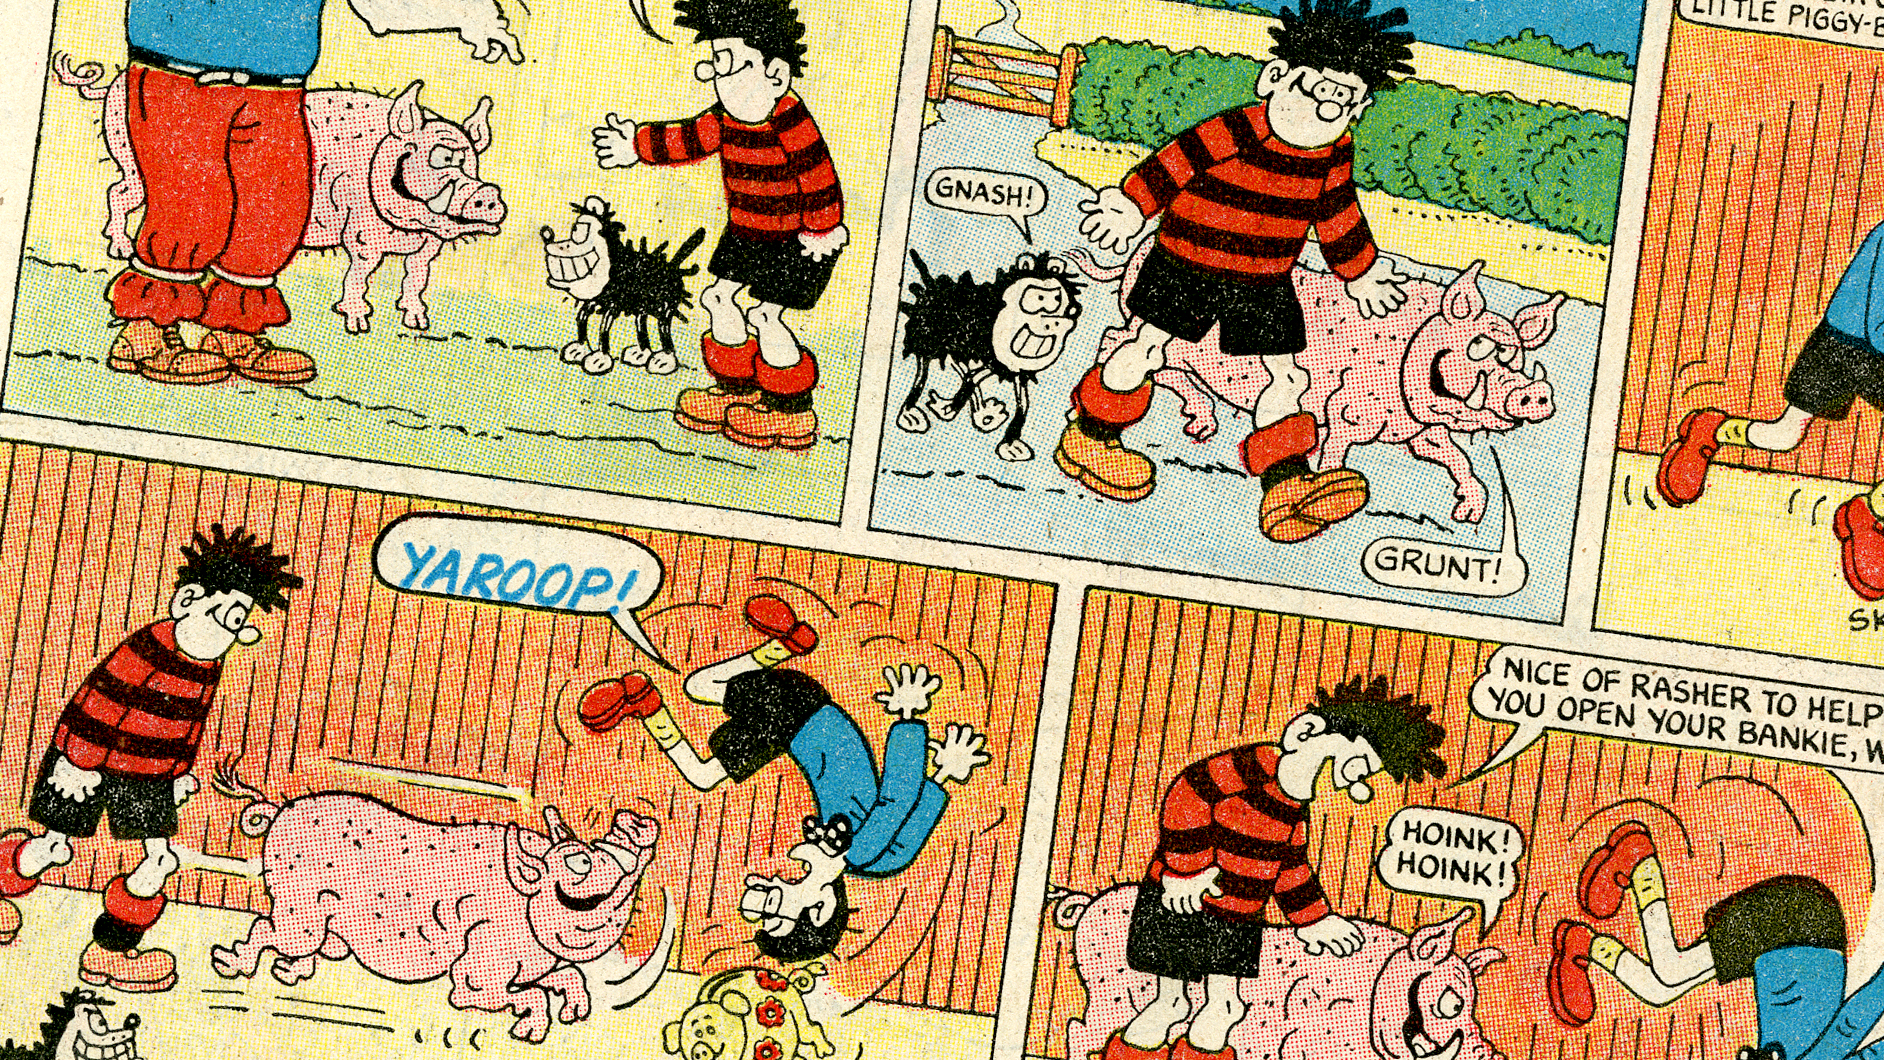 Dennis the Menace and Rasher - First Appearance!